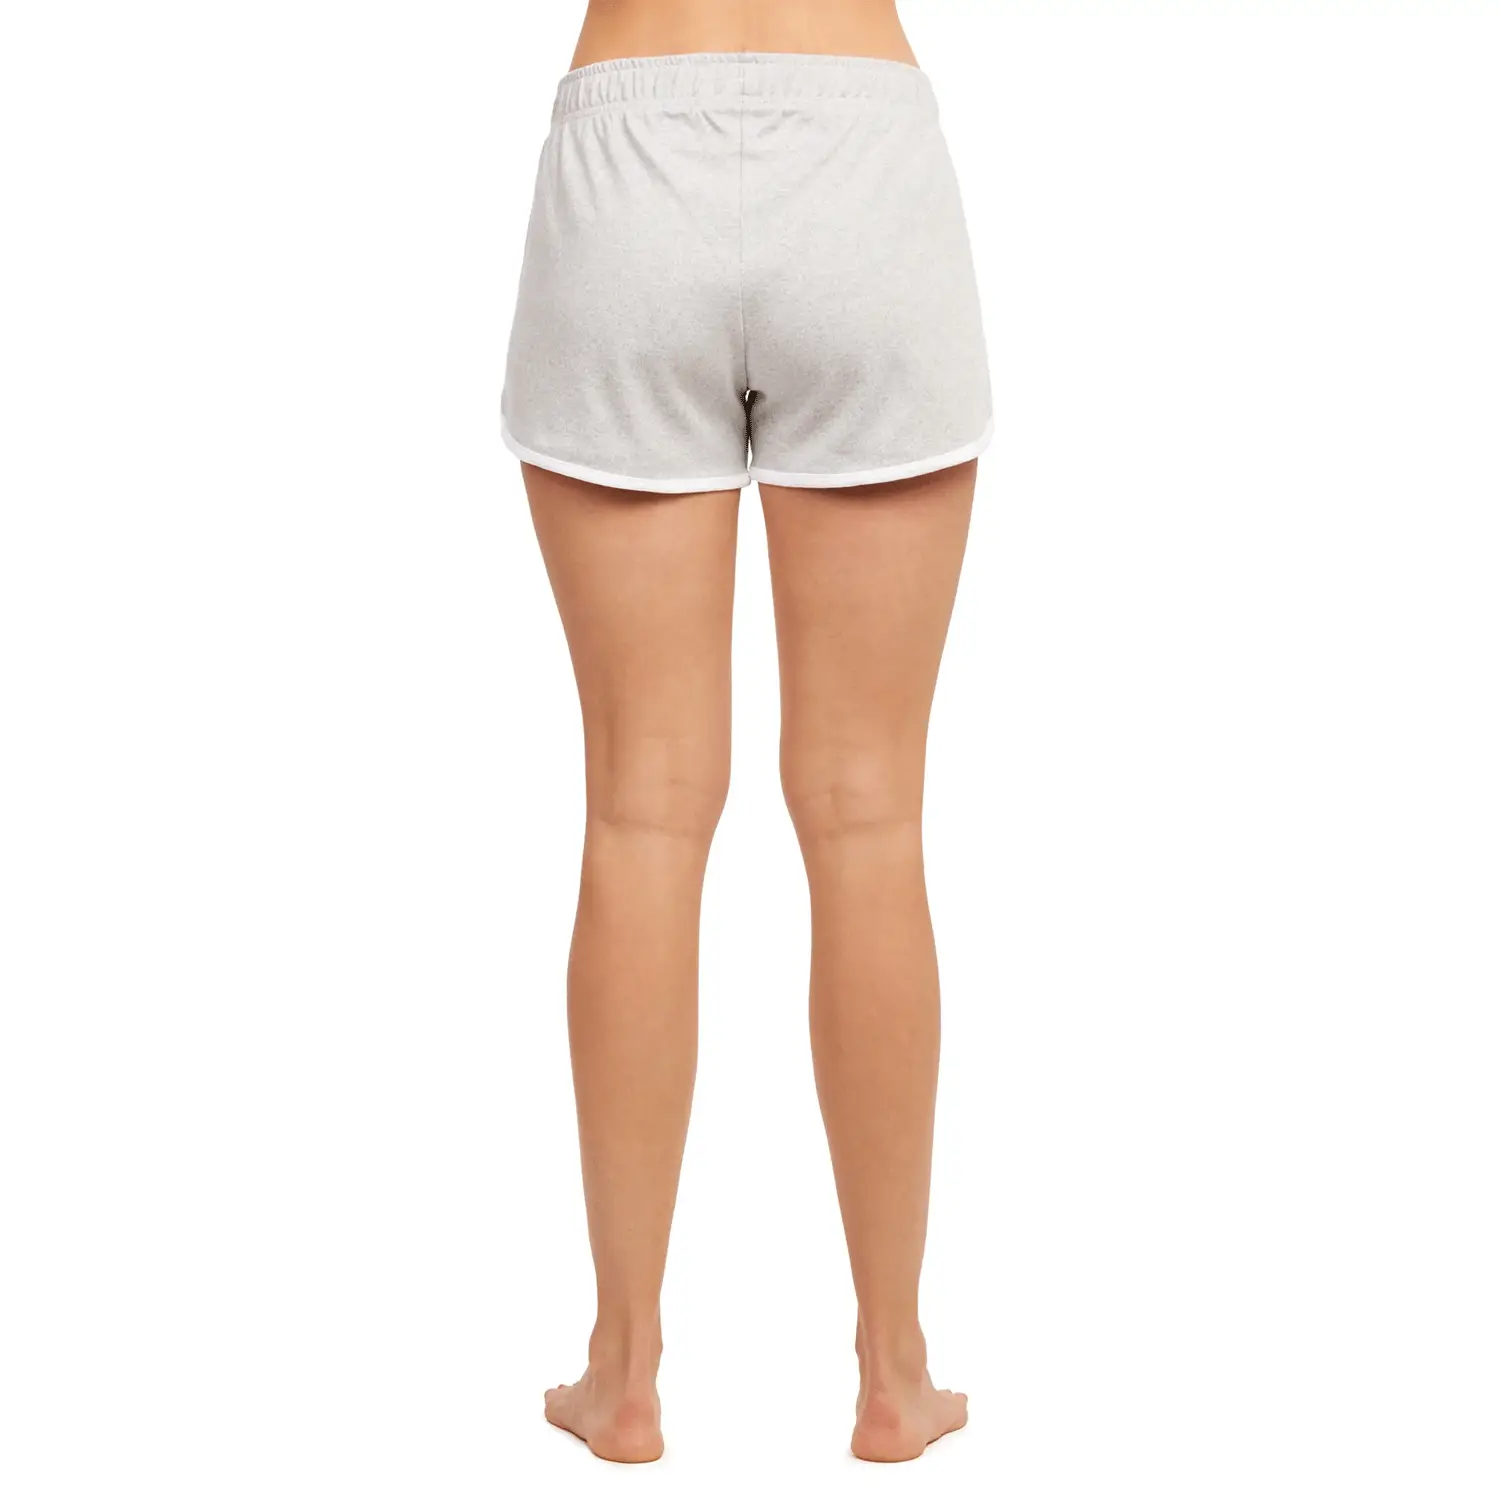 Sofra Ladies Dolphin Shorts Pack of 3